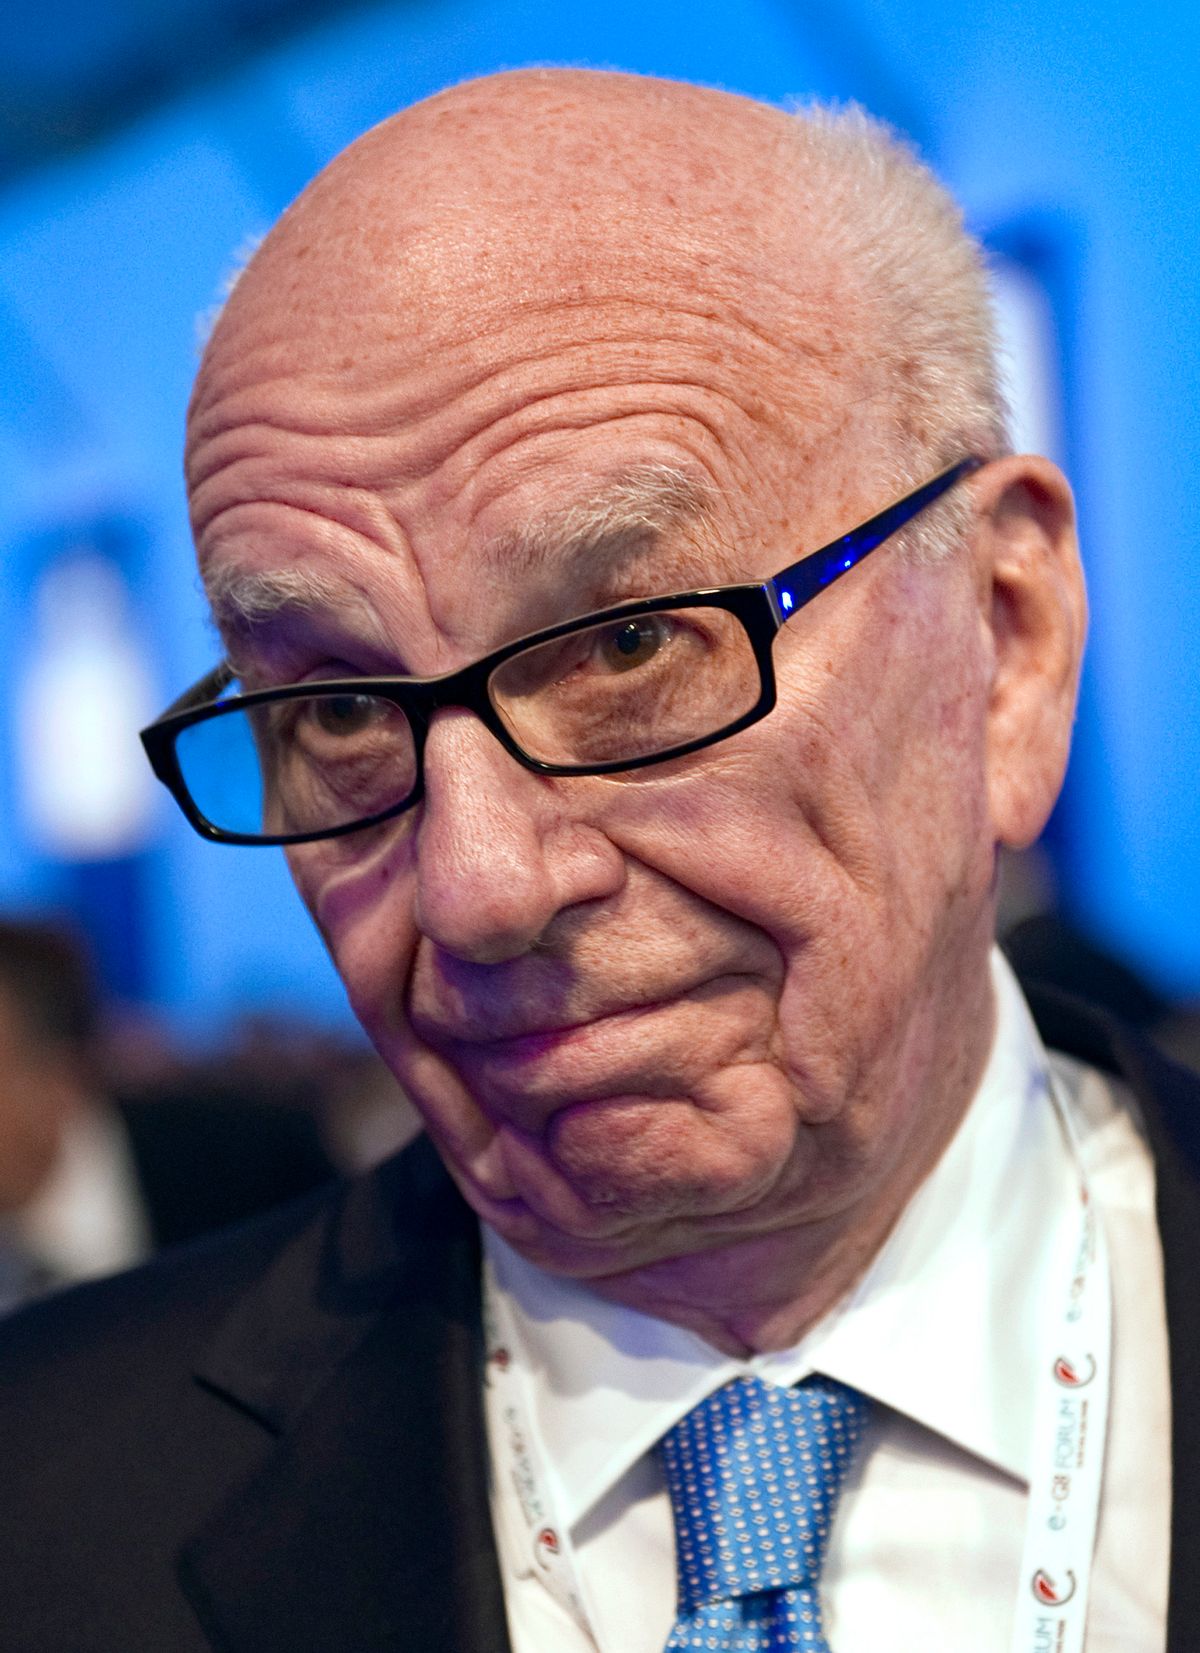 News Corporation CEO Rupert Murdoch attends the eG8 forum in Paris, in this file photo taken May 24, 2011.  (Reuters)